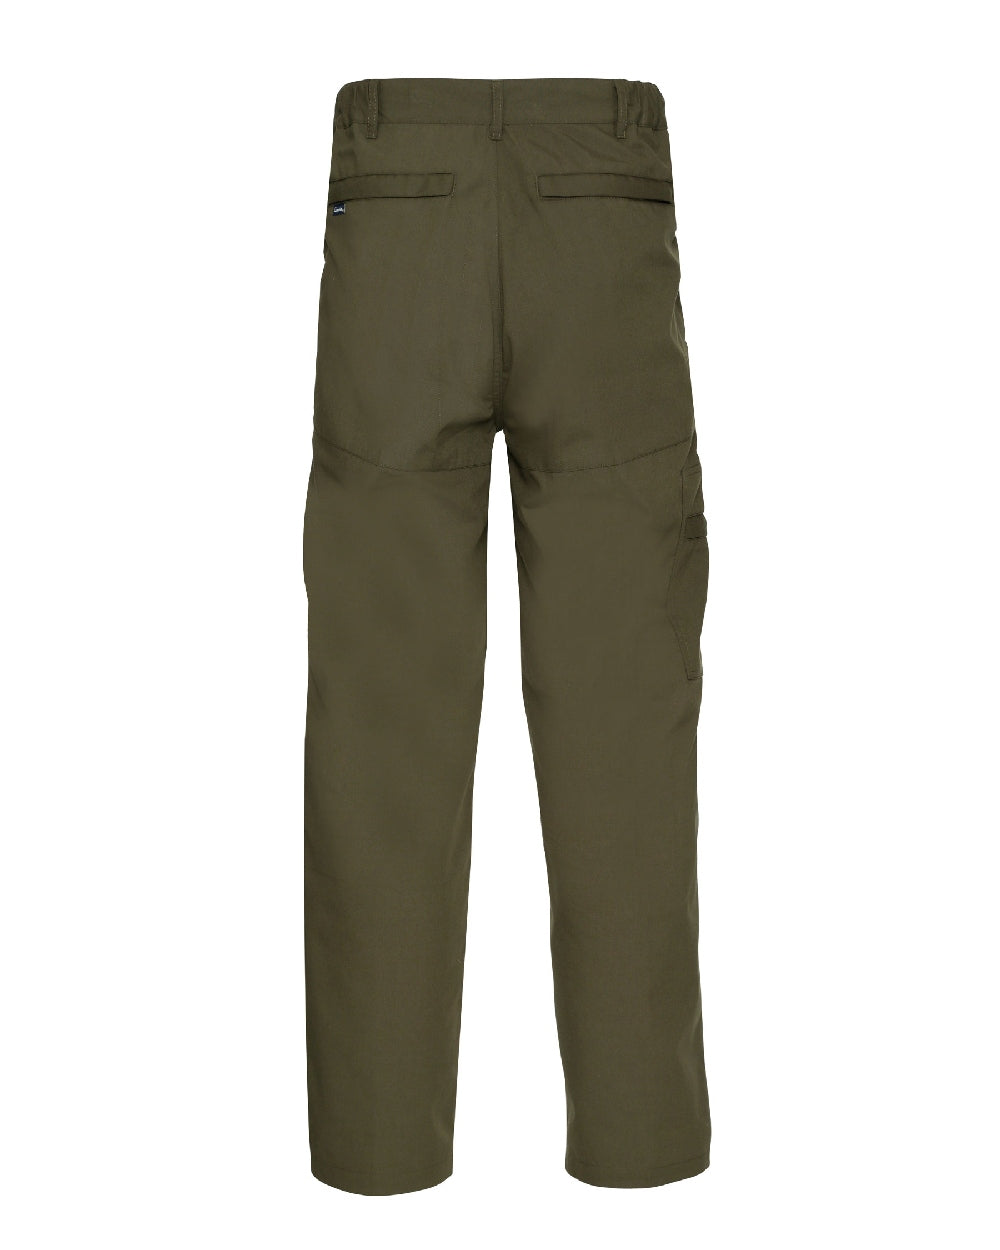 Champion Wenlock Multi Pocket Activity Trousers in Olive 